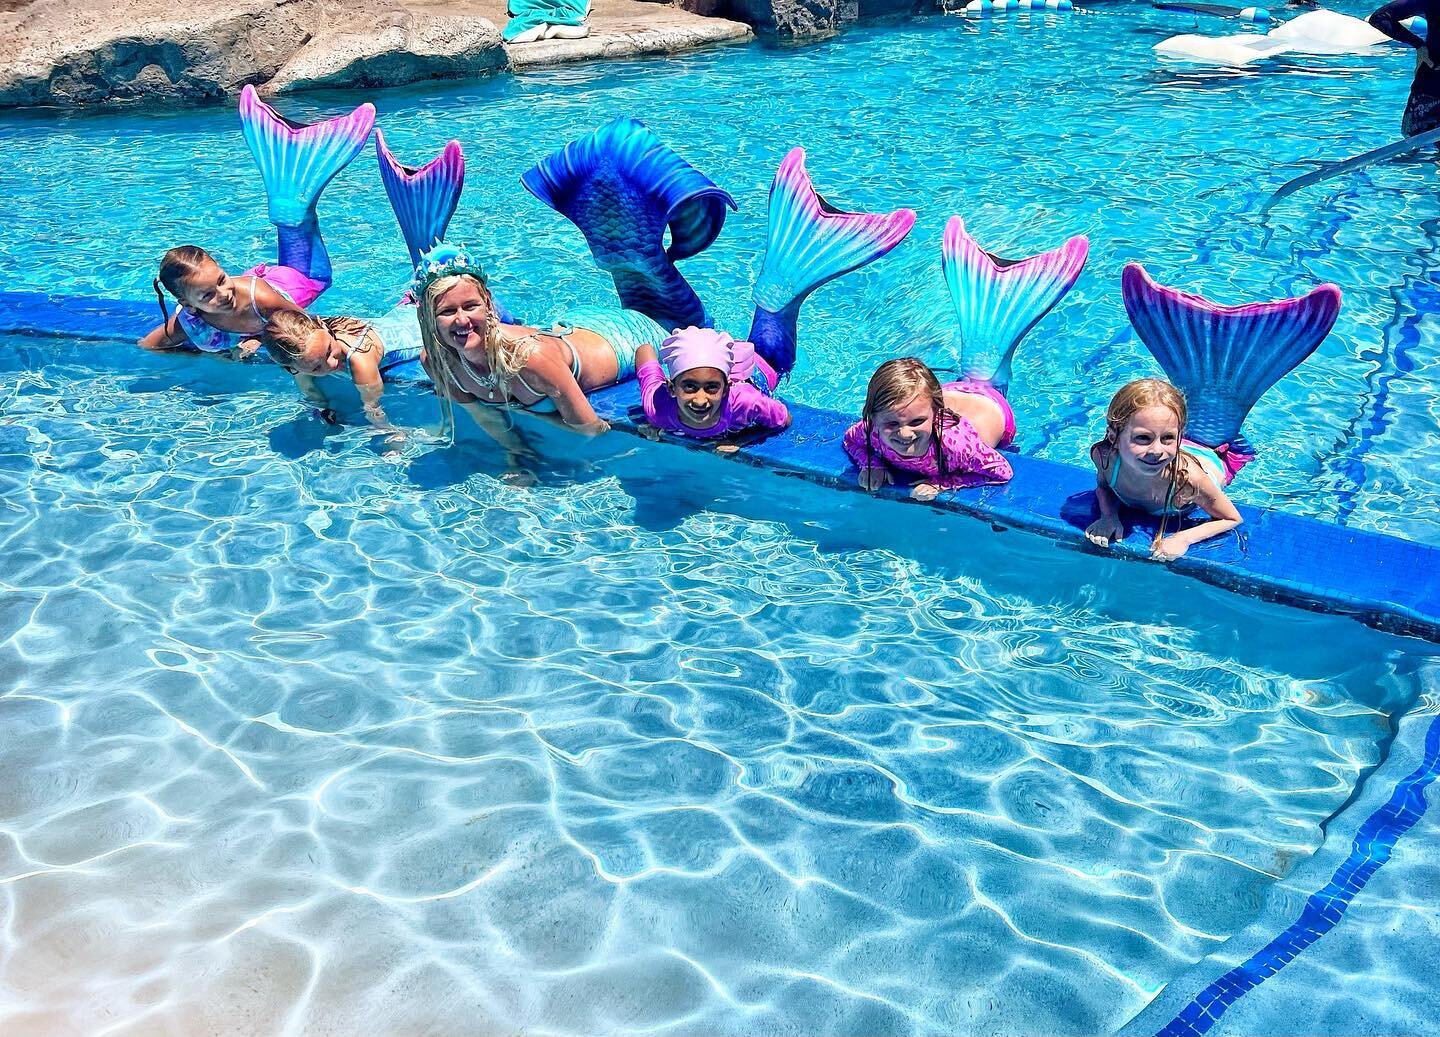 🫧🧜&zwj;♀️ Mini mermaids!! Loved this shot from our Mermaid Mondays at the Sheraton Ka&rsquo;anapali @sheratonmaui this summer. Excited to be back this festive season to make a splash for the holidays!! 🎄🎁🤶

#mermaid #mauimermaids #mermaidsmaui #